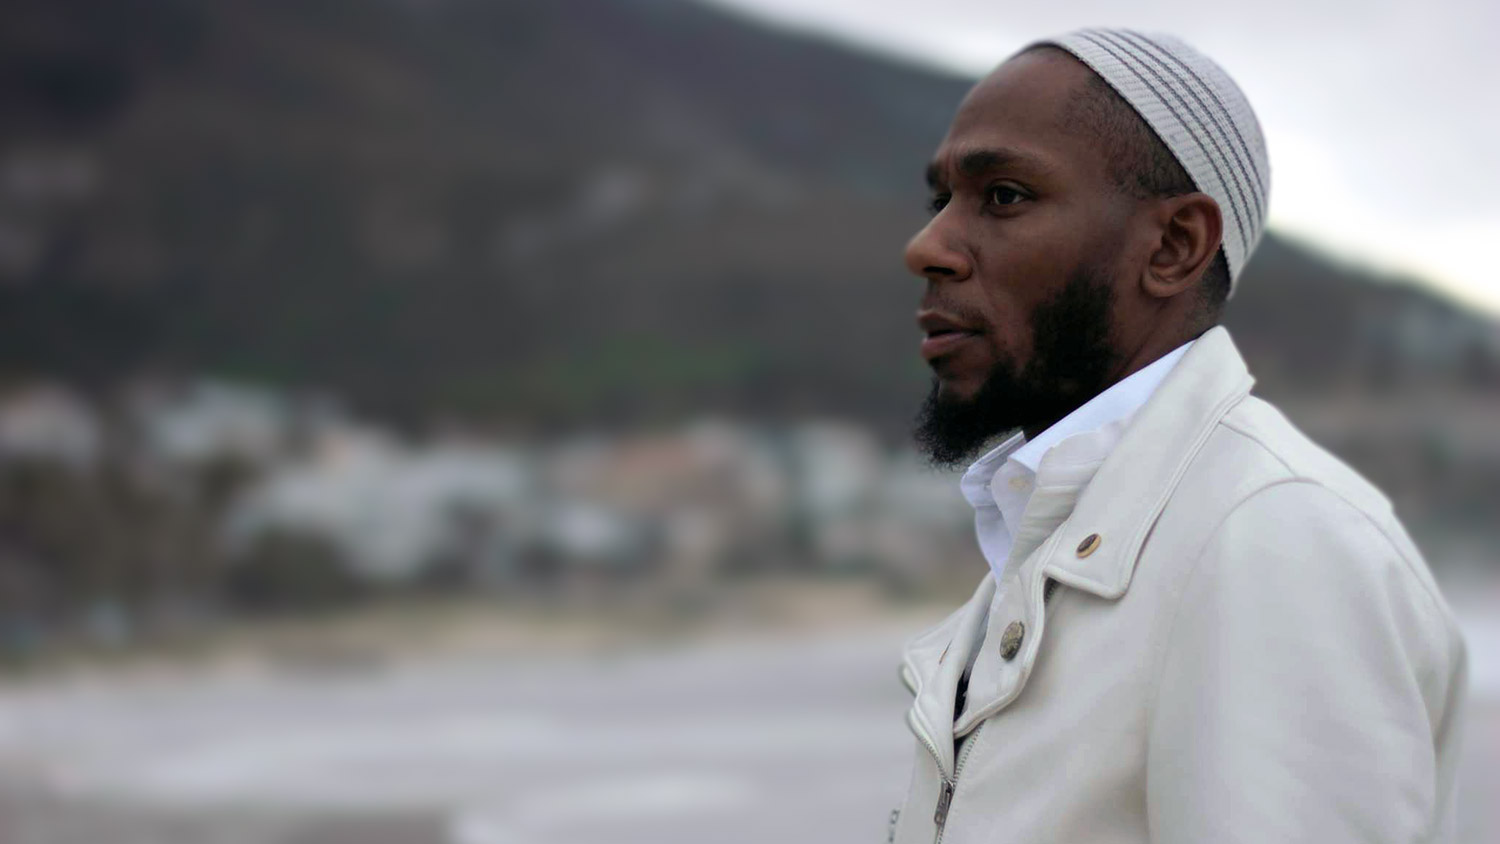 Yasiin Bey formerly known as Mos Def